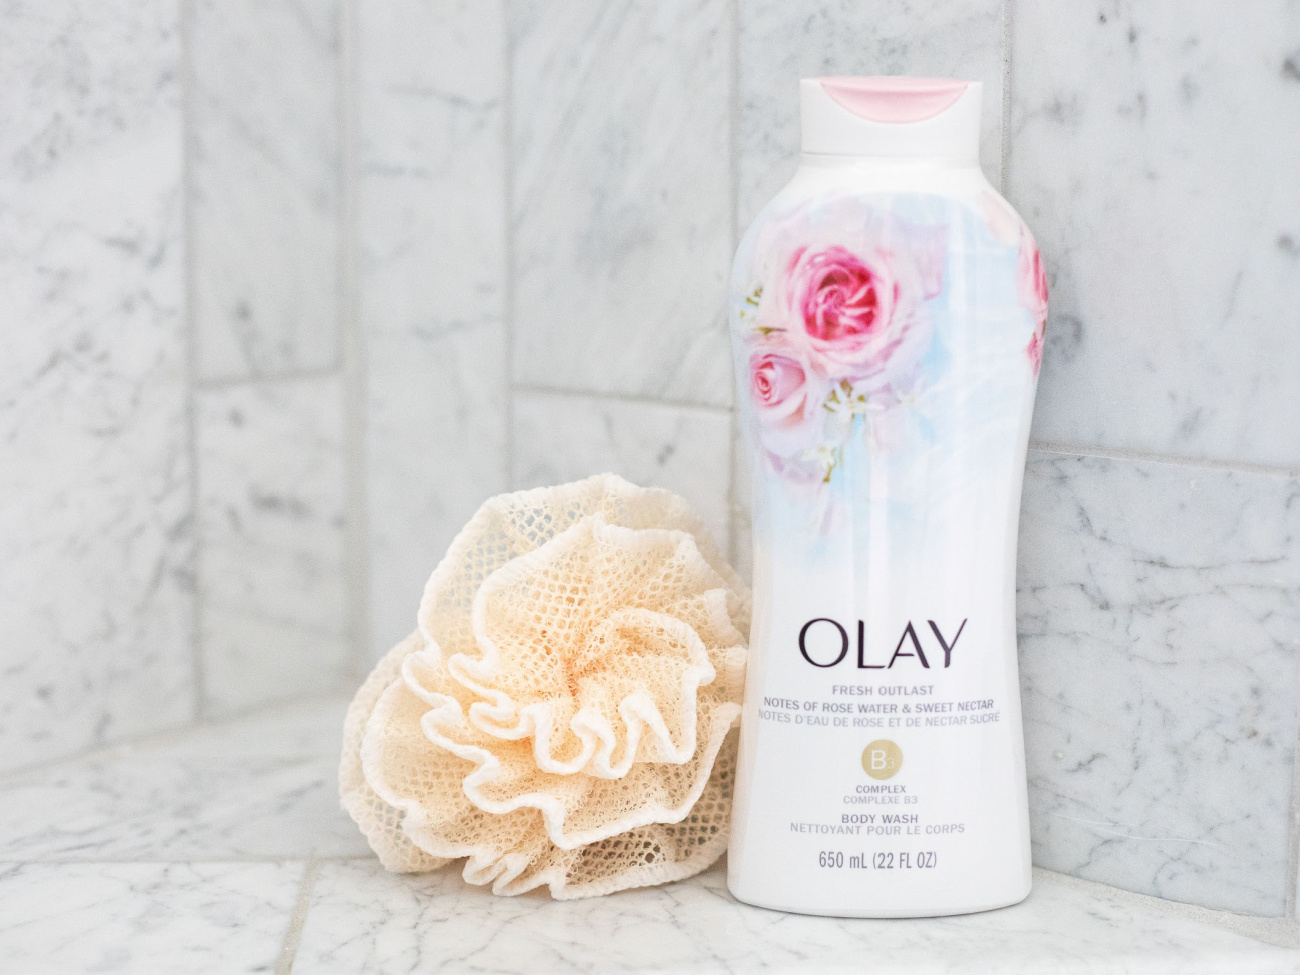 Olay Body Wash Just $2.99 At Publix (Regular Price $6.99) on I Heart Publix 1